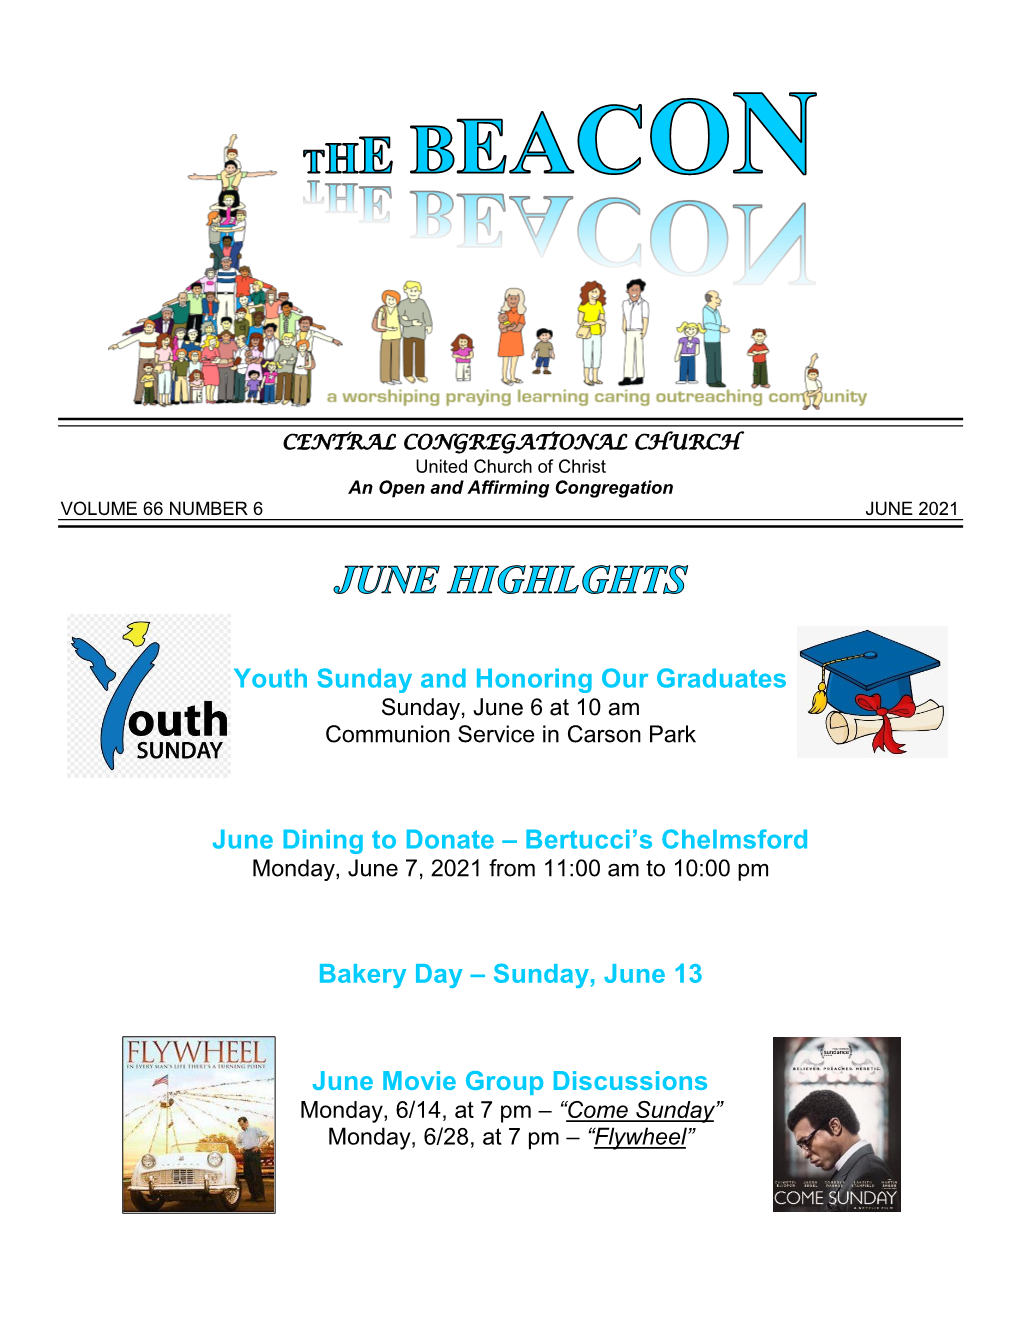 Youth Sunday and Honoring Our Graduates Sunday, June 6 at 10 Am Communion Service in Carson Park